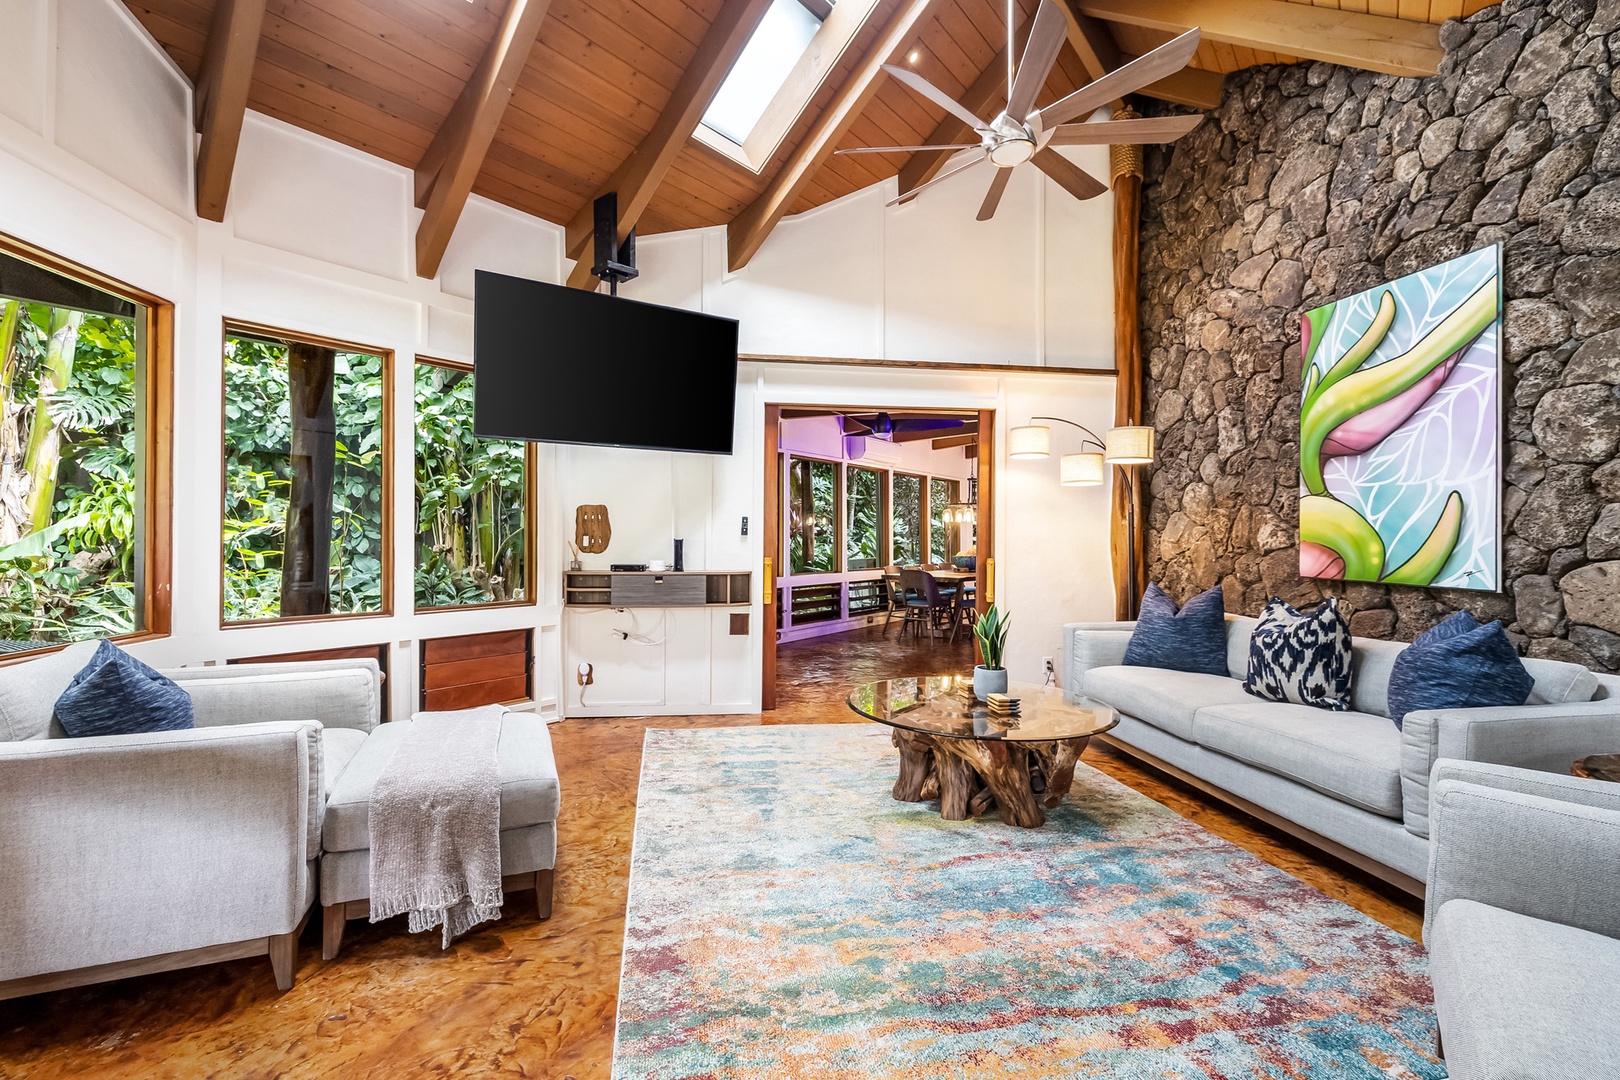 Waimanalo Vacation Rentals, Hawaii Hobbit House - Living area opens to the main dining area.